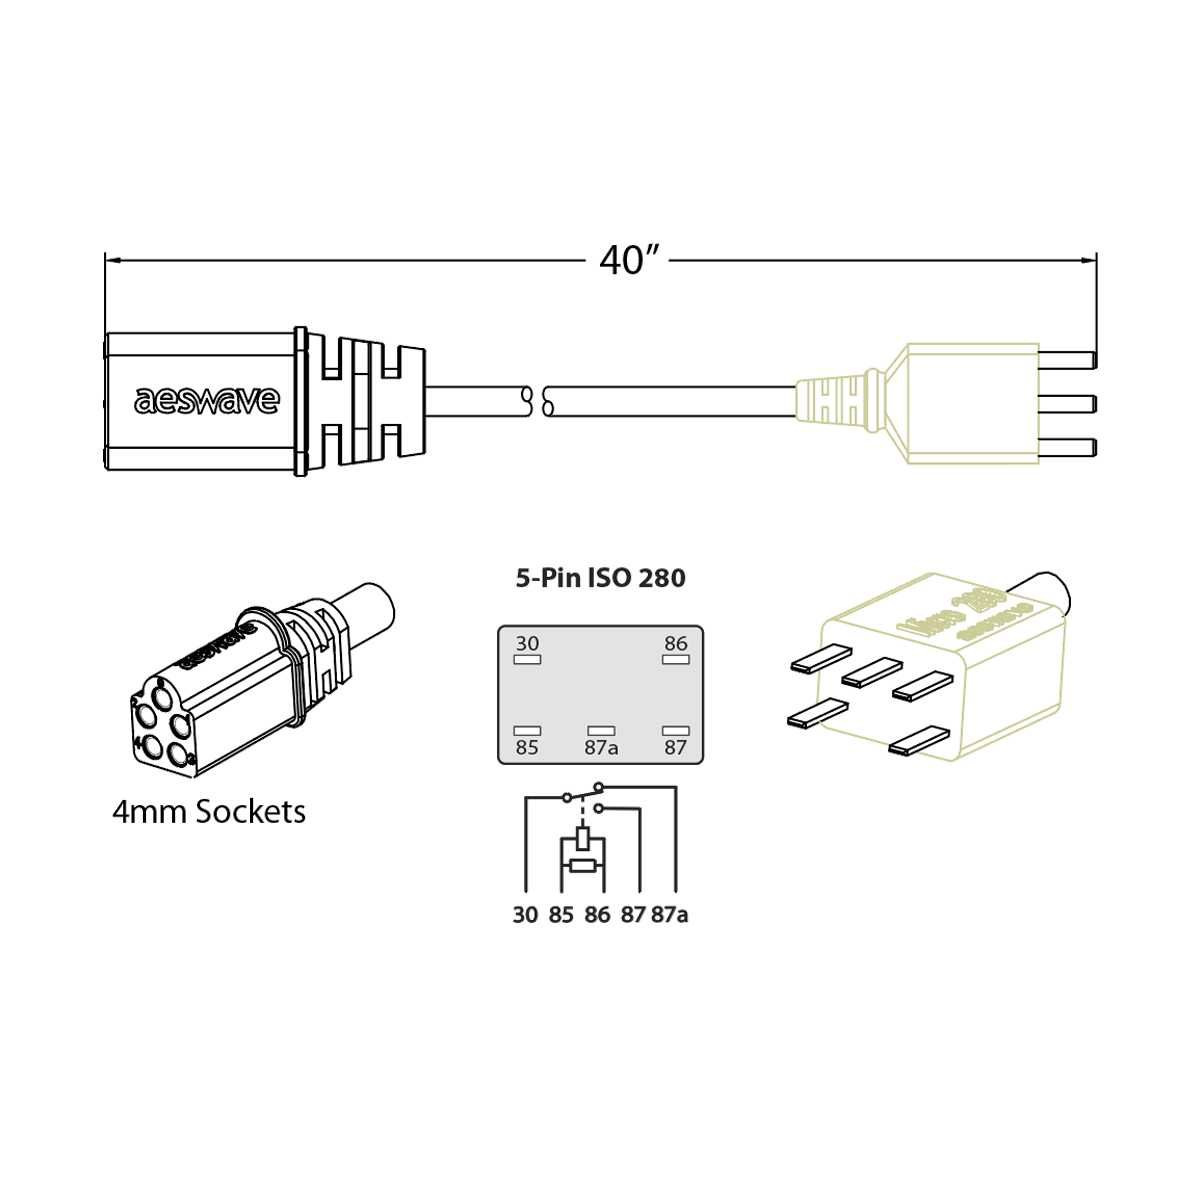 uActivate® 5-Pin ISO 280 cable specifications